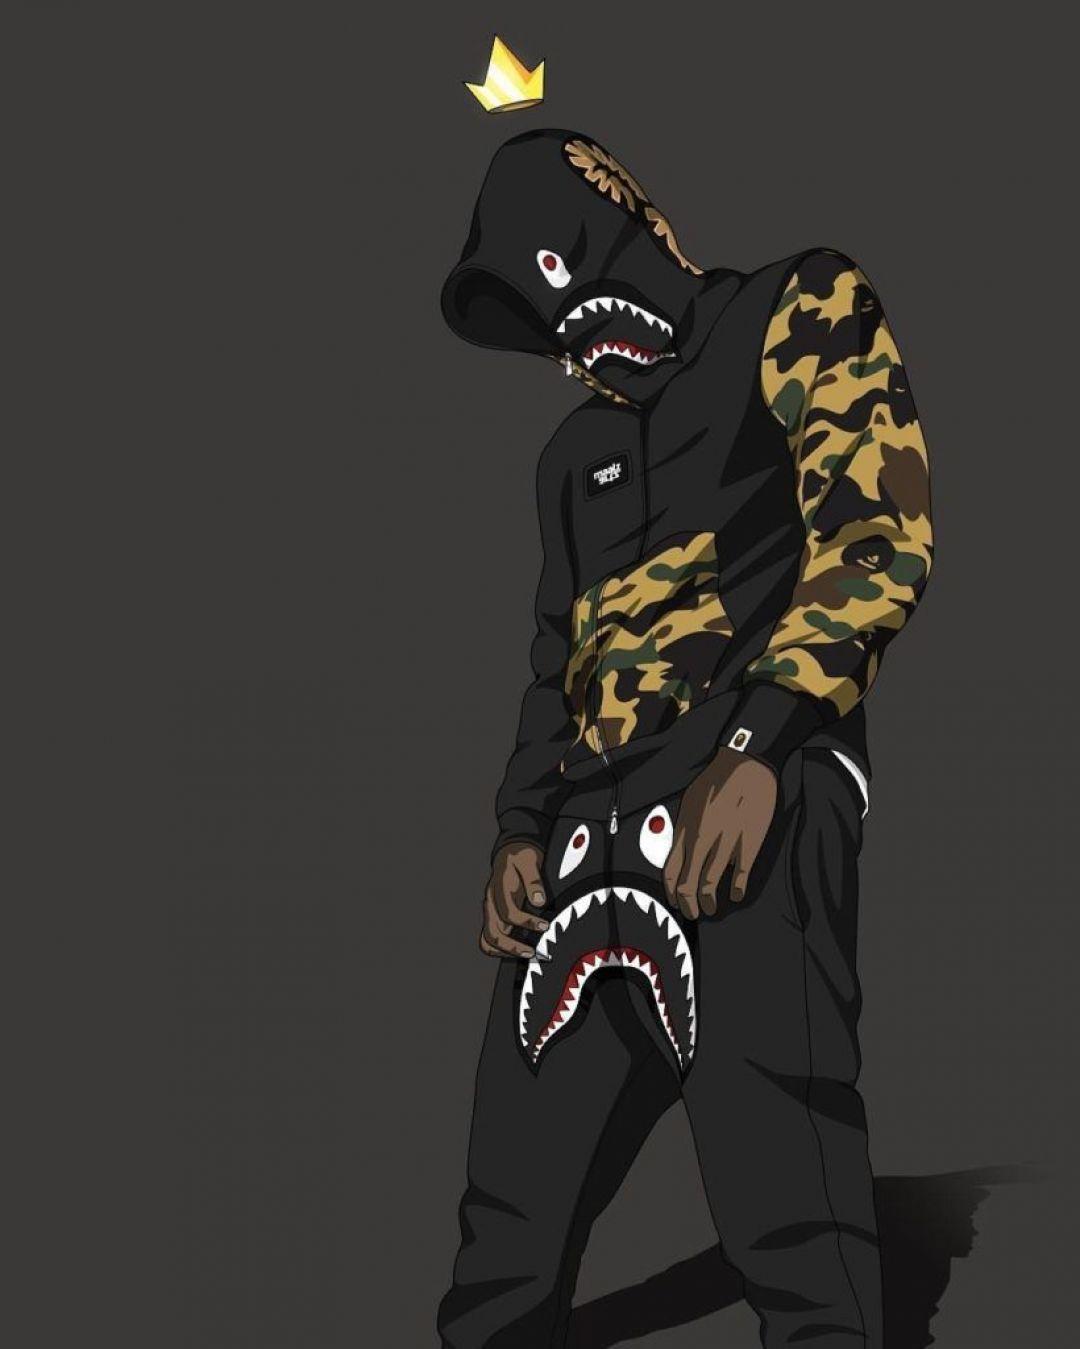 1080 x 1349 · jpeg - [40+] Hypebeast - Android, iPhone, Desktop HD Backgrounds / Wallpapers ...